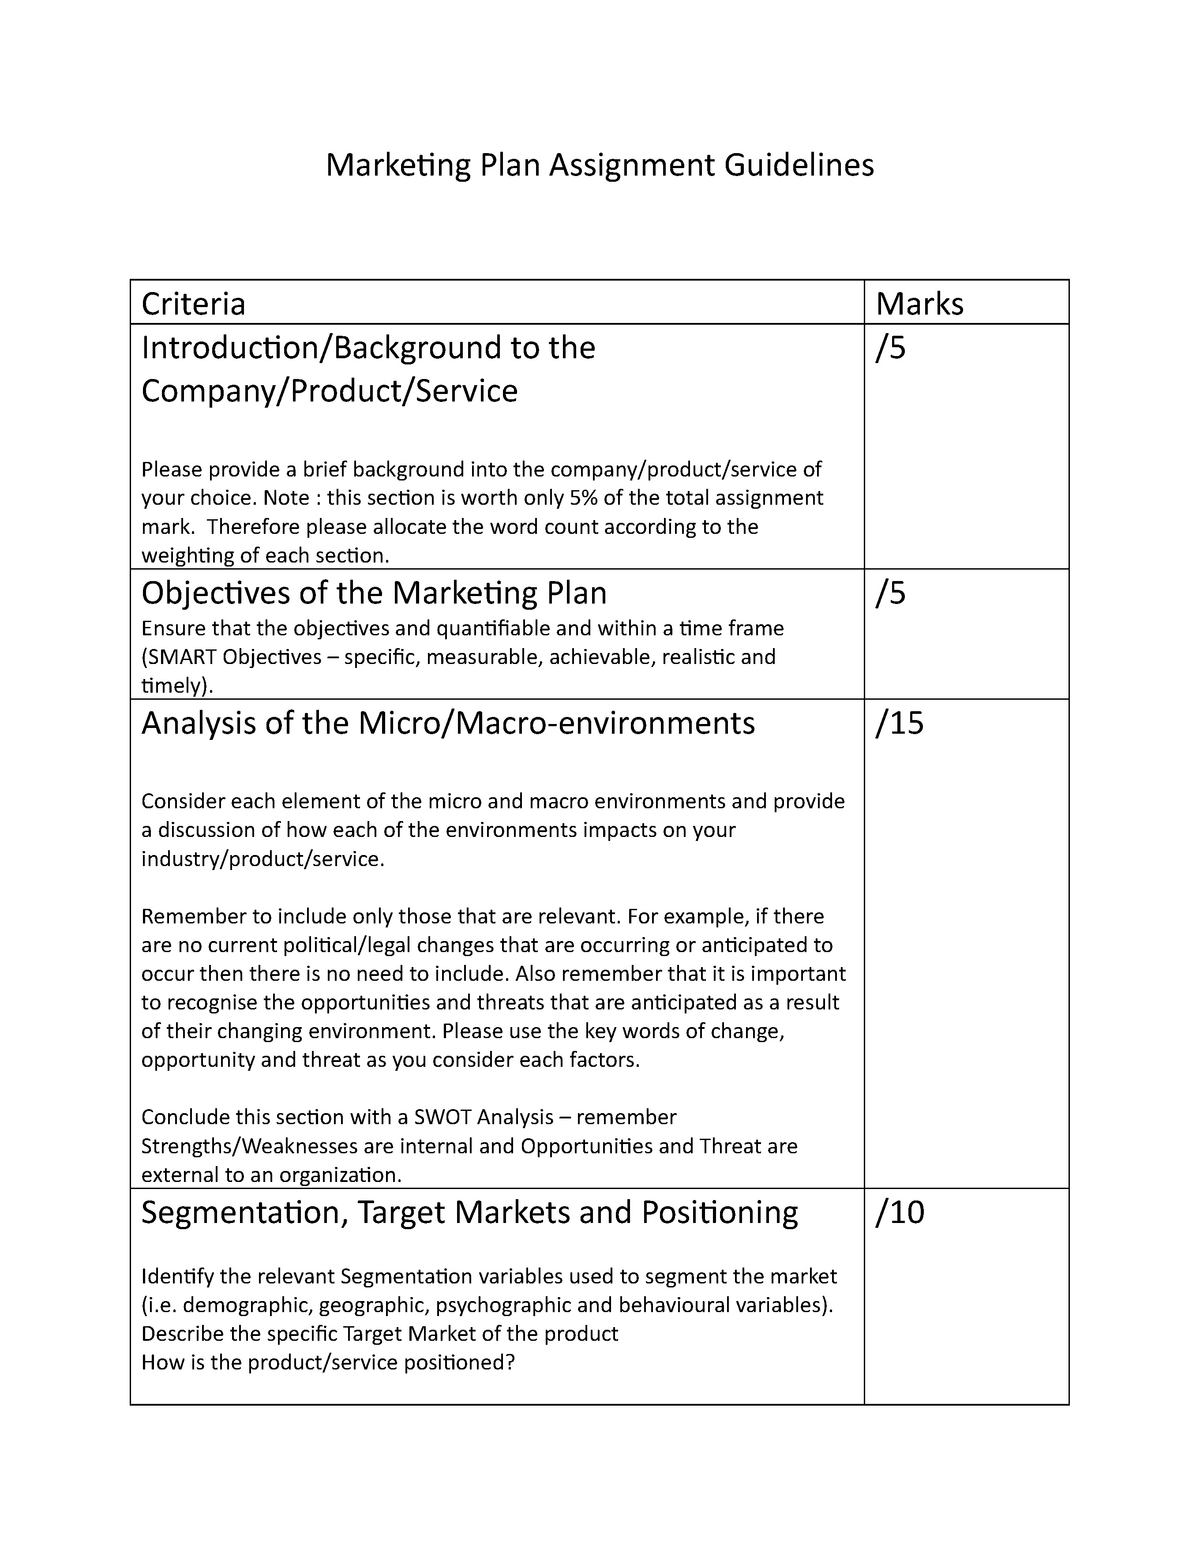 personal marketing plan assignment example